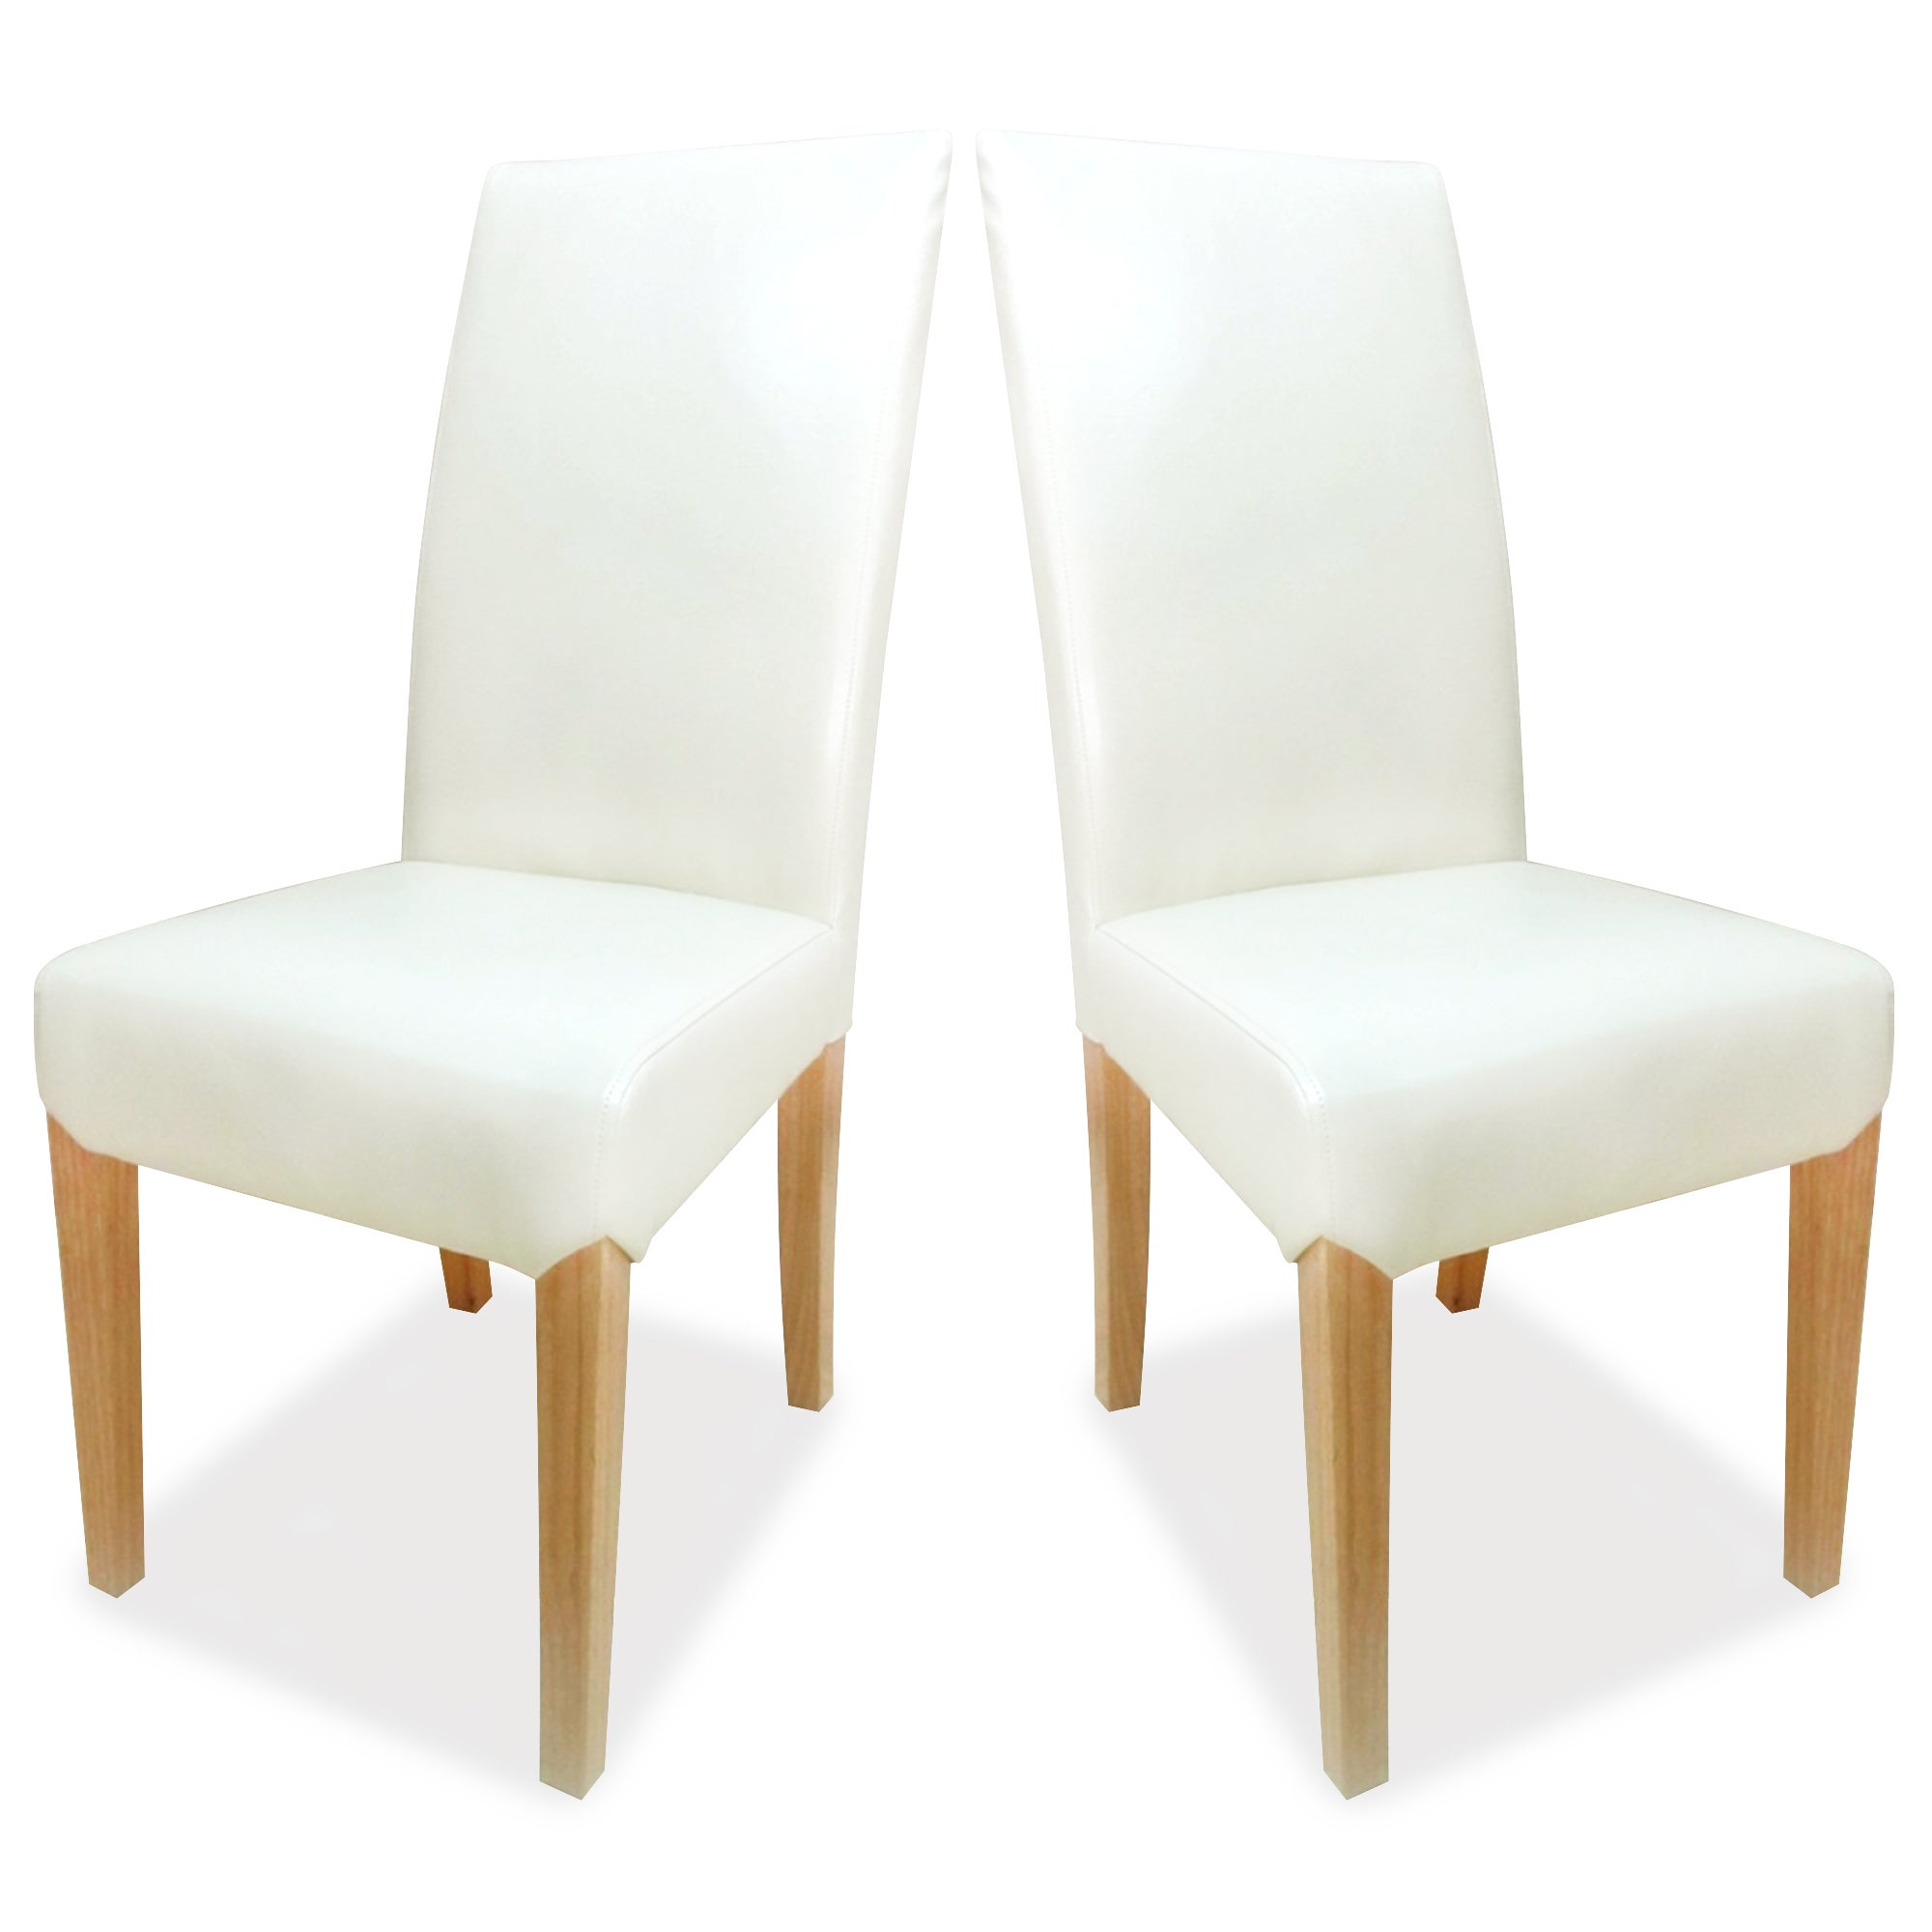 Unique Dining Chair Covers Dunelm 